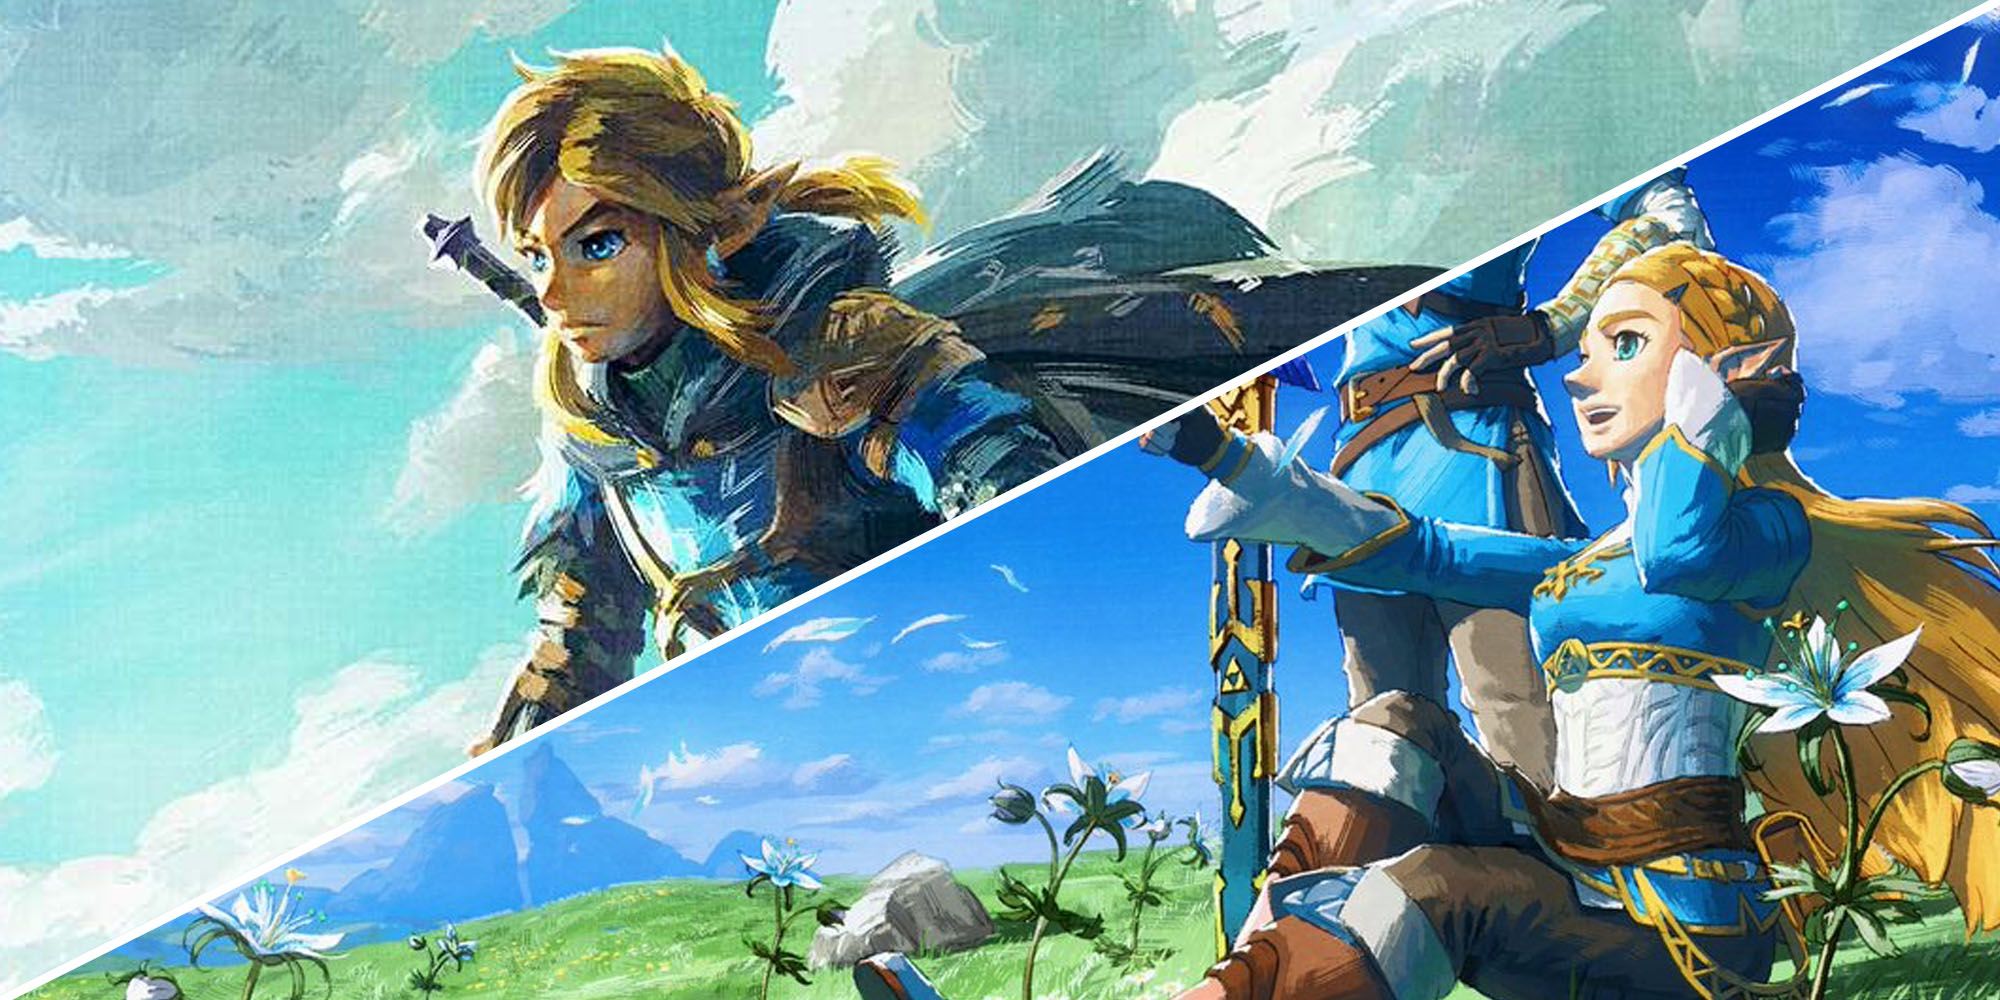 Official artwork of Link and Zelda from Tears of the Kingdom & Breath of the Wild